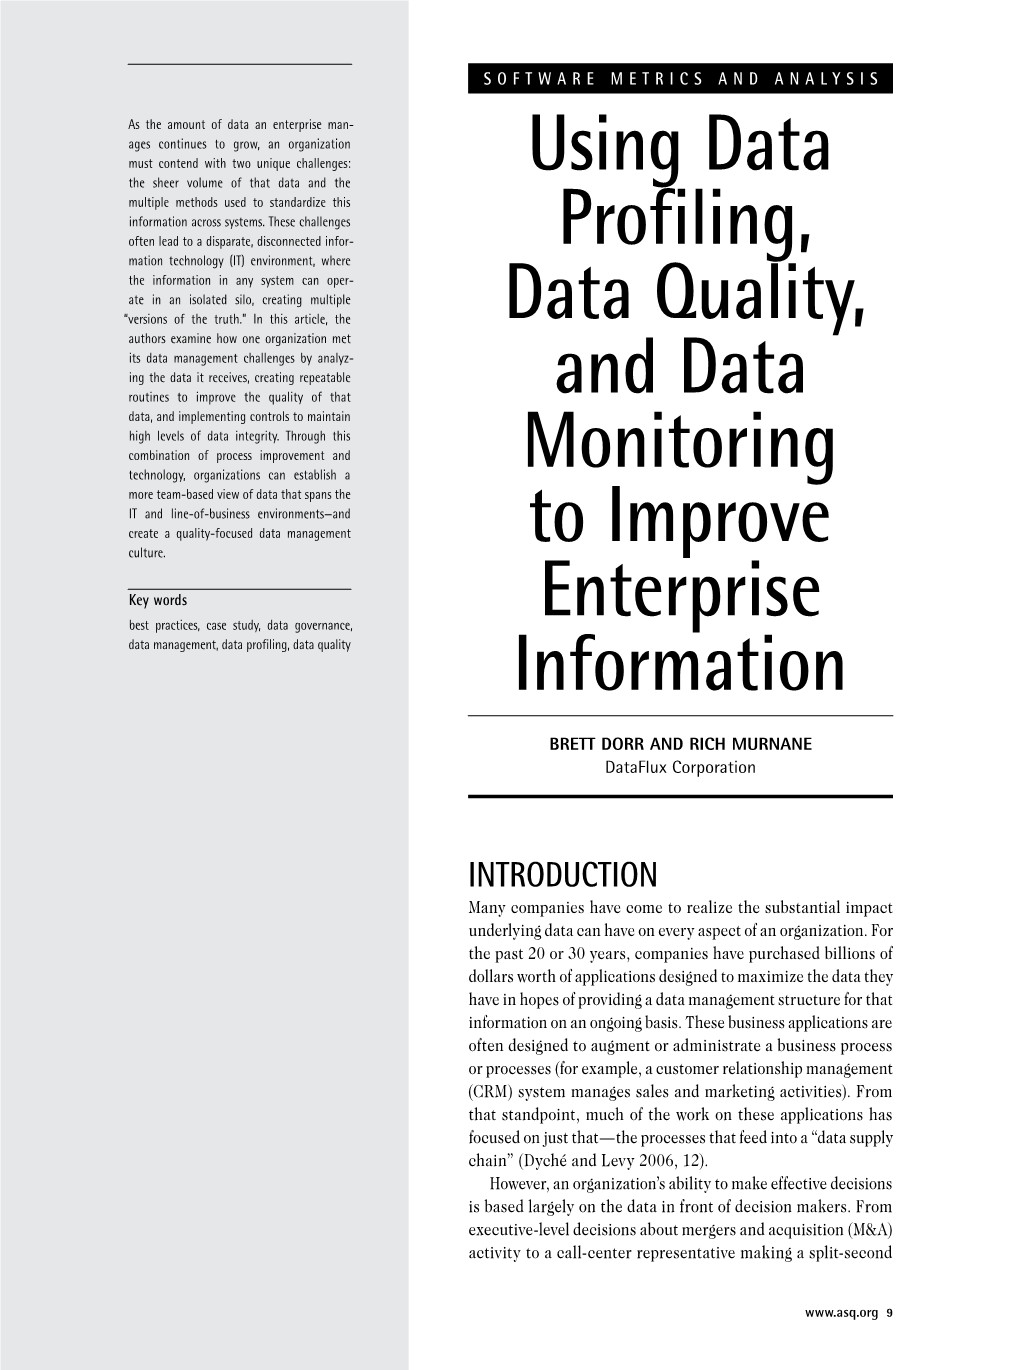 Using Data Profiling, Data Quality, and Data Monitoring to Improve Enterprise Information